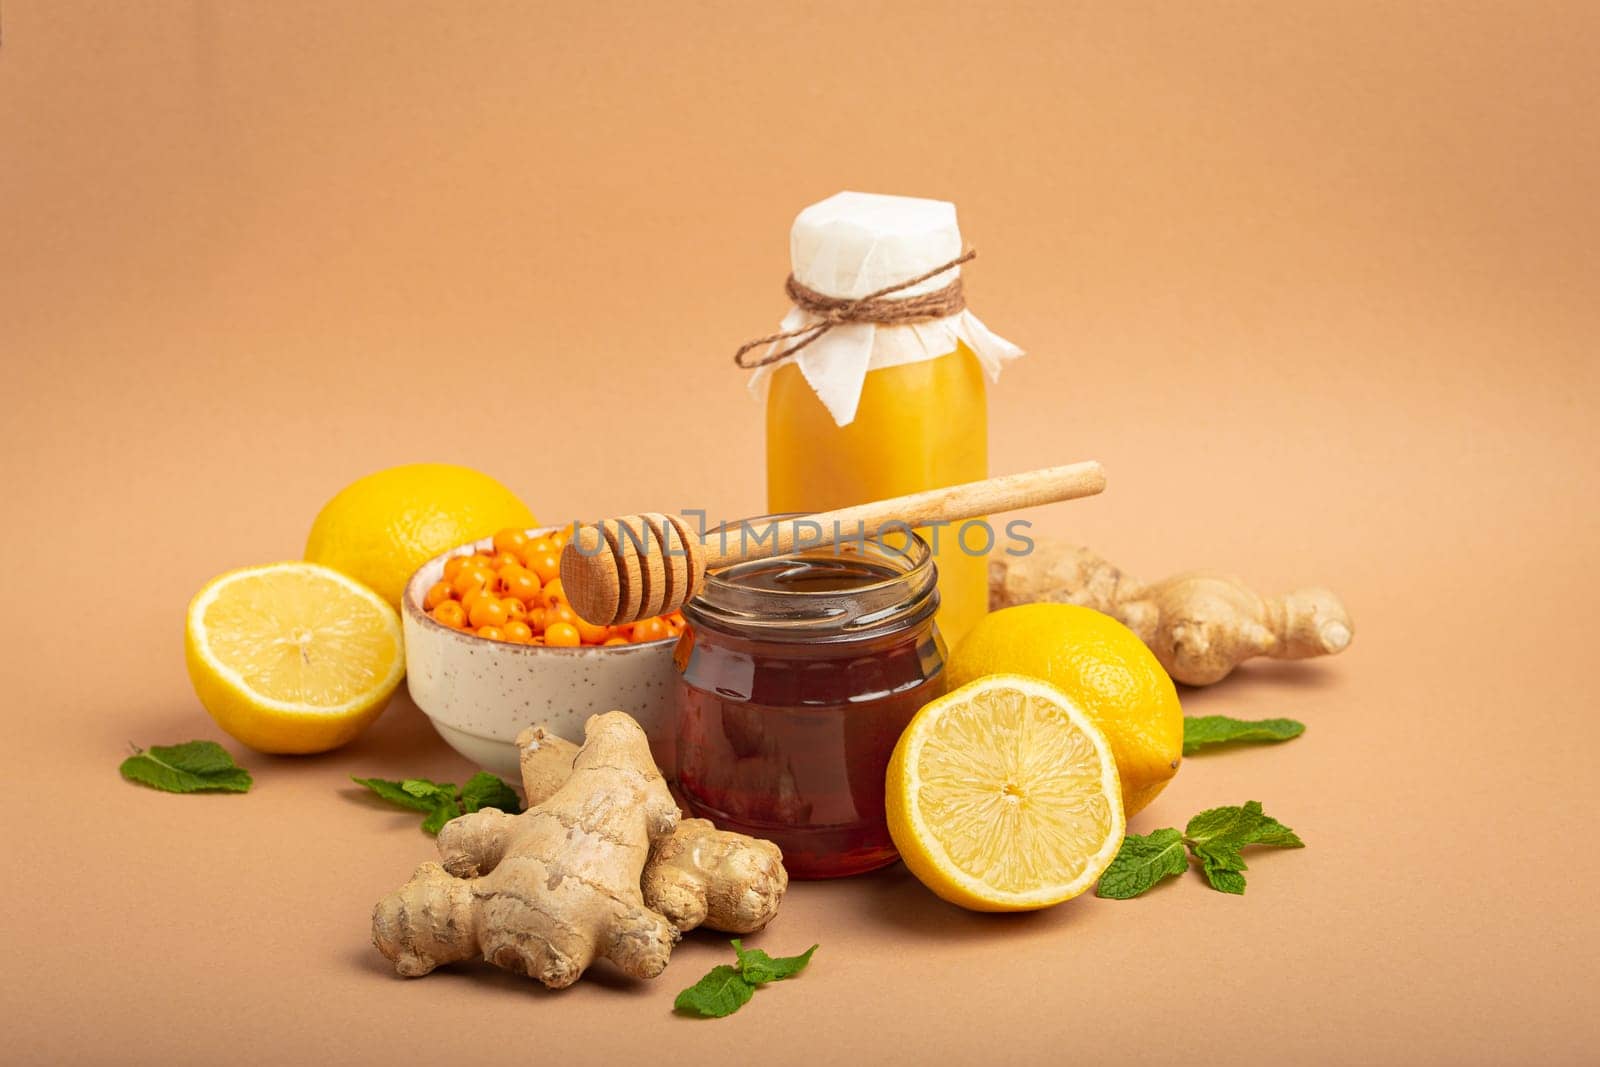 Composition with detox drink, sea buckthorn berries, lemons, mint, ginger, honey in glass jar. Food for immunity stimulation and against flu. Healthy natural remedies to boost immune system by its_al_dente